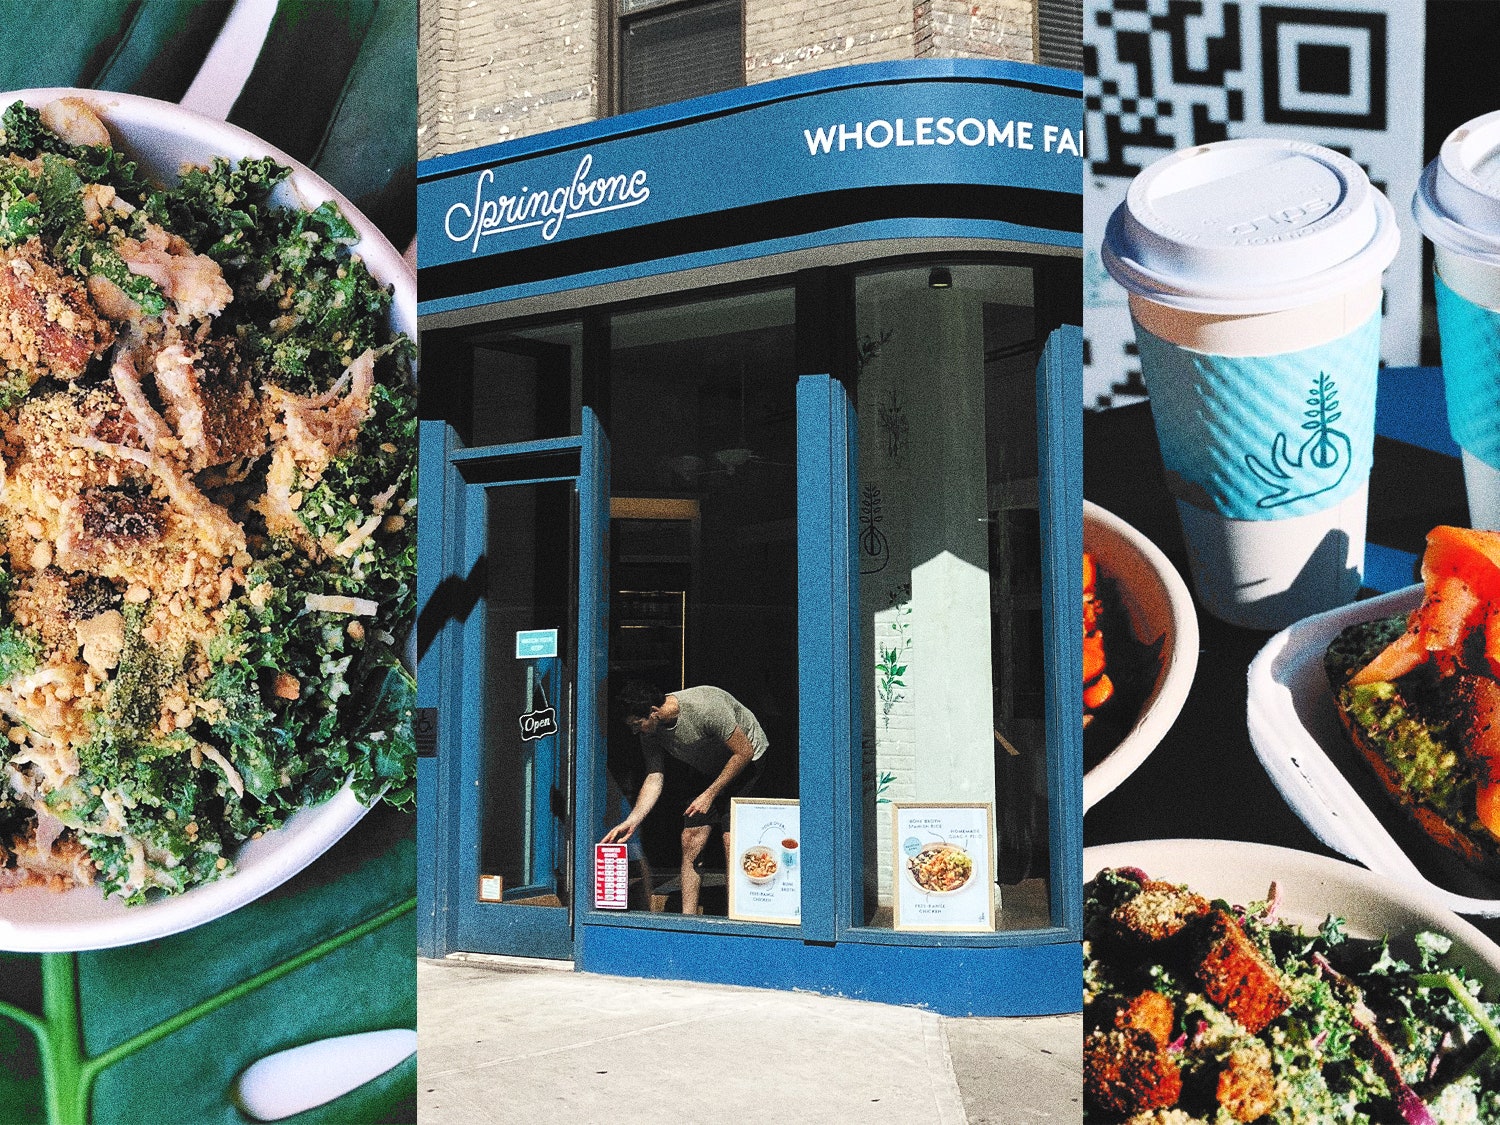 This New Fast-Casual Chain Is Bringing the Alternative Nutrition Internet Into Real Life, Starting With the Seed Oils